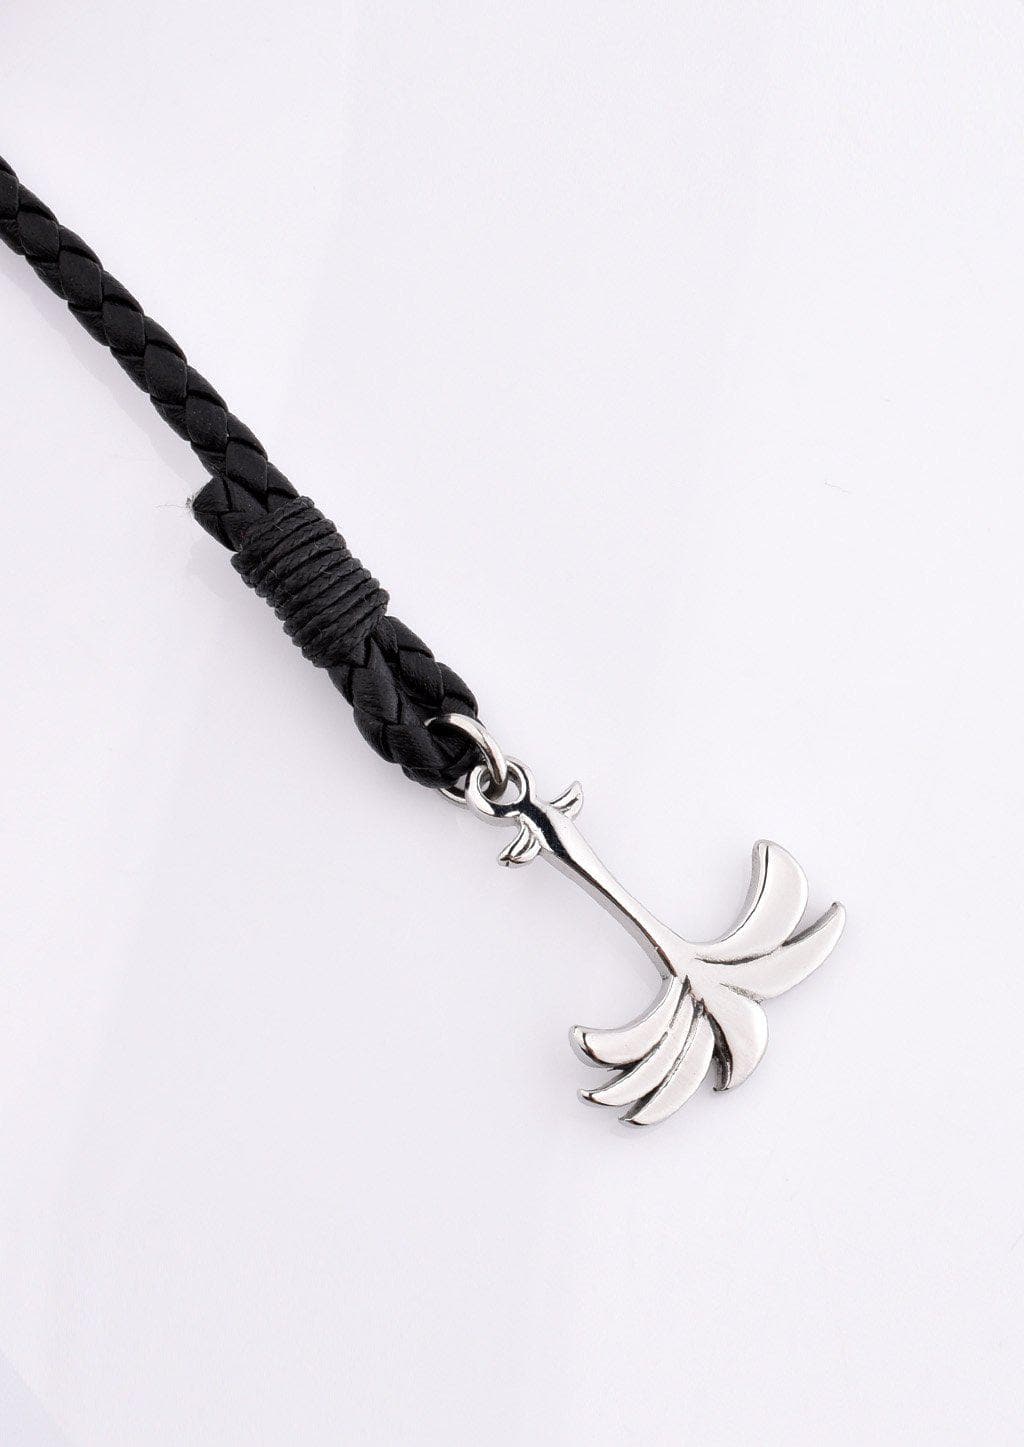 Starlight - Season two Palm anchor bracelet with black leather. Close up with details.